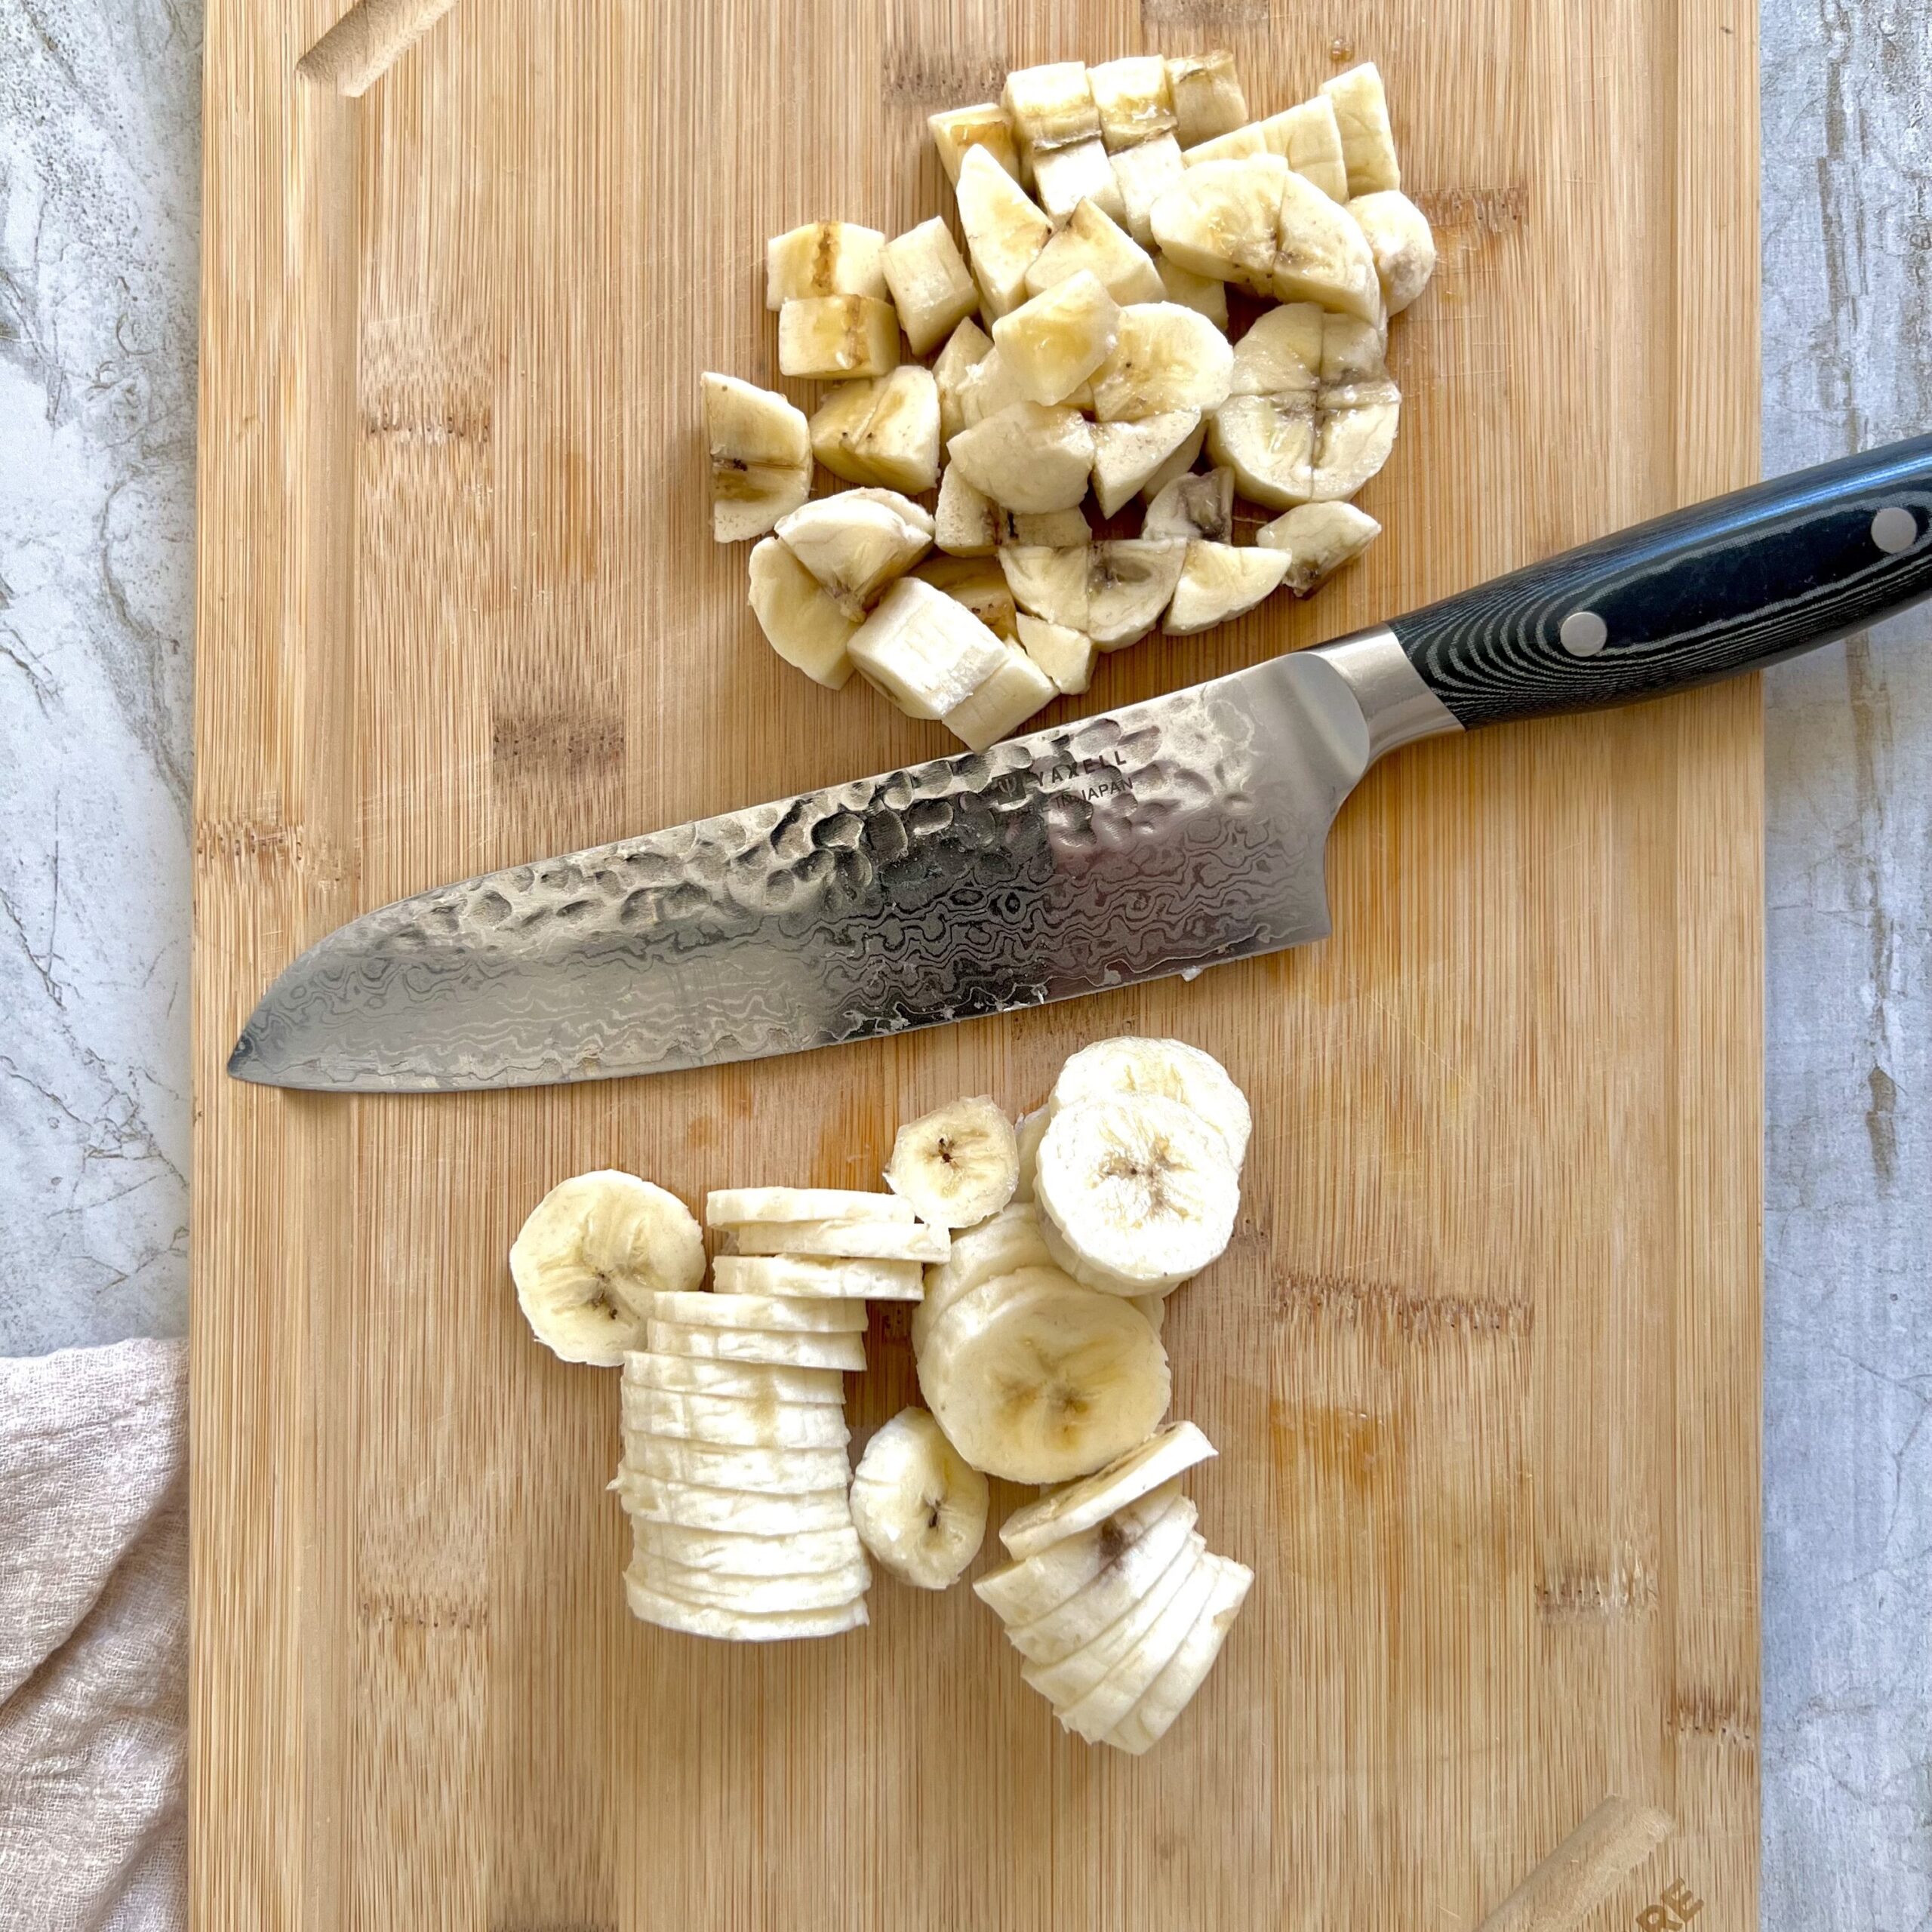 A large knife sitting in the middle of a bamboo cutting board with thinly sliced bananas on one side and pieces of minced bananas on the other side.